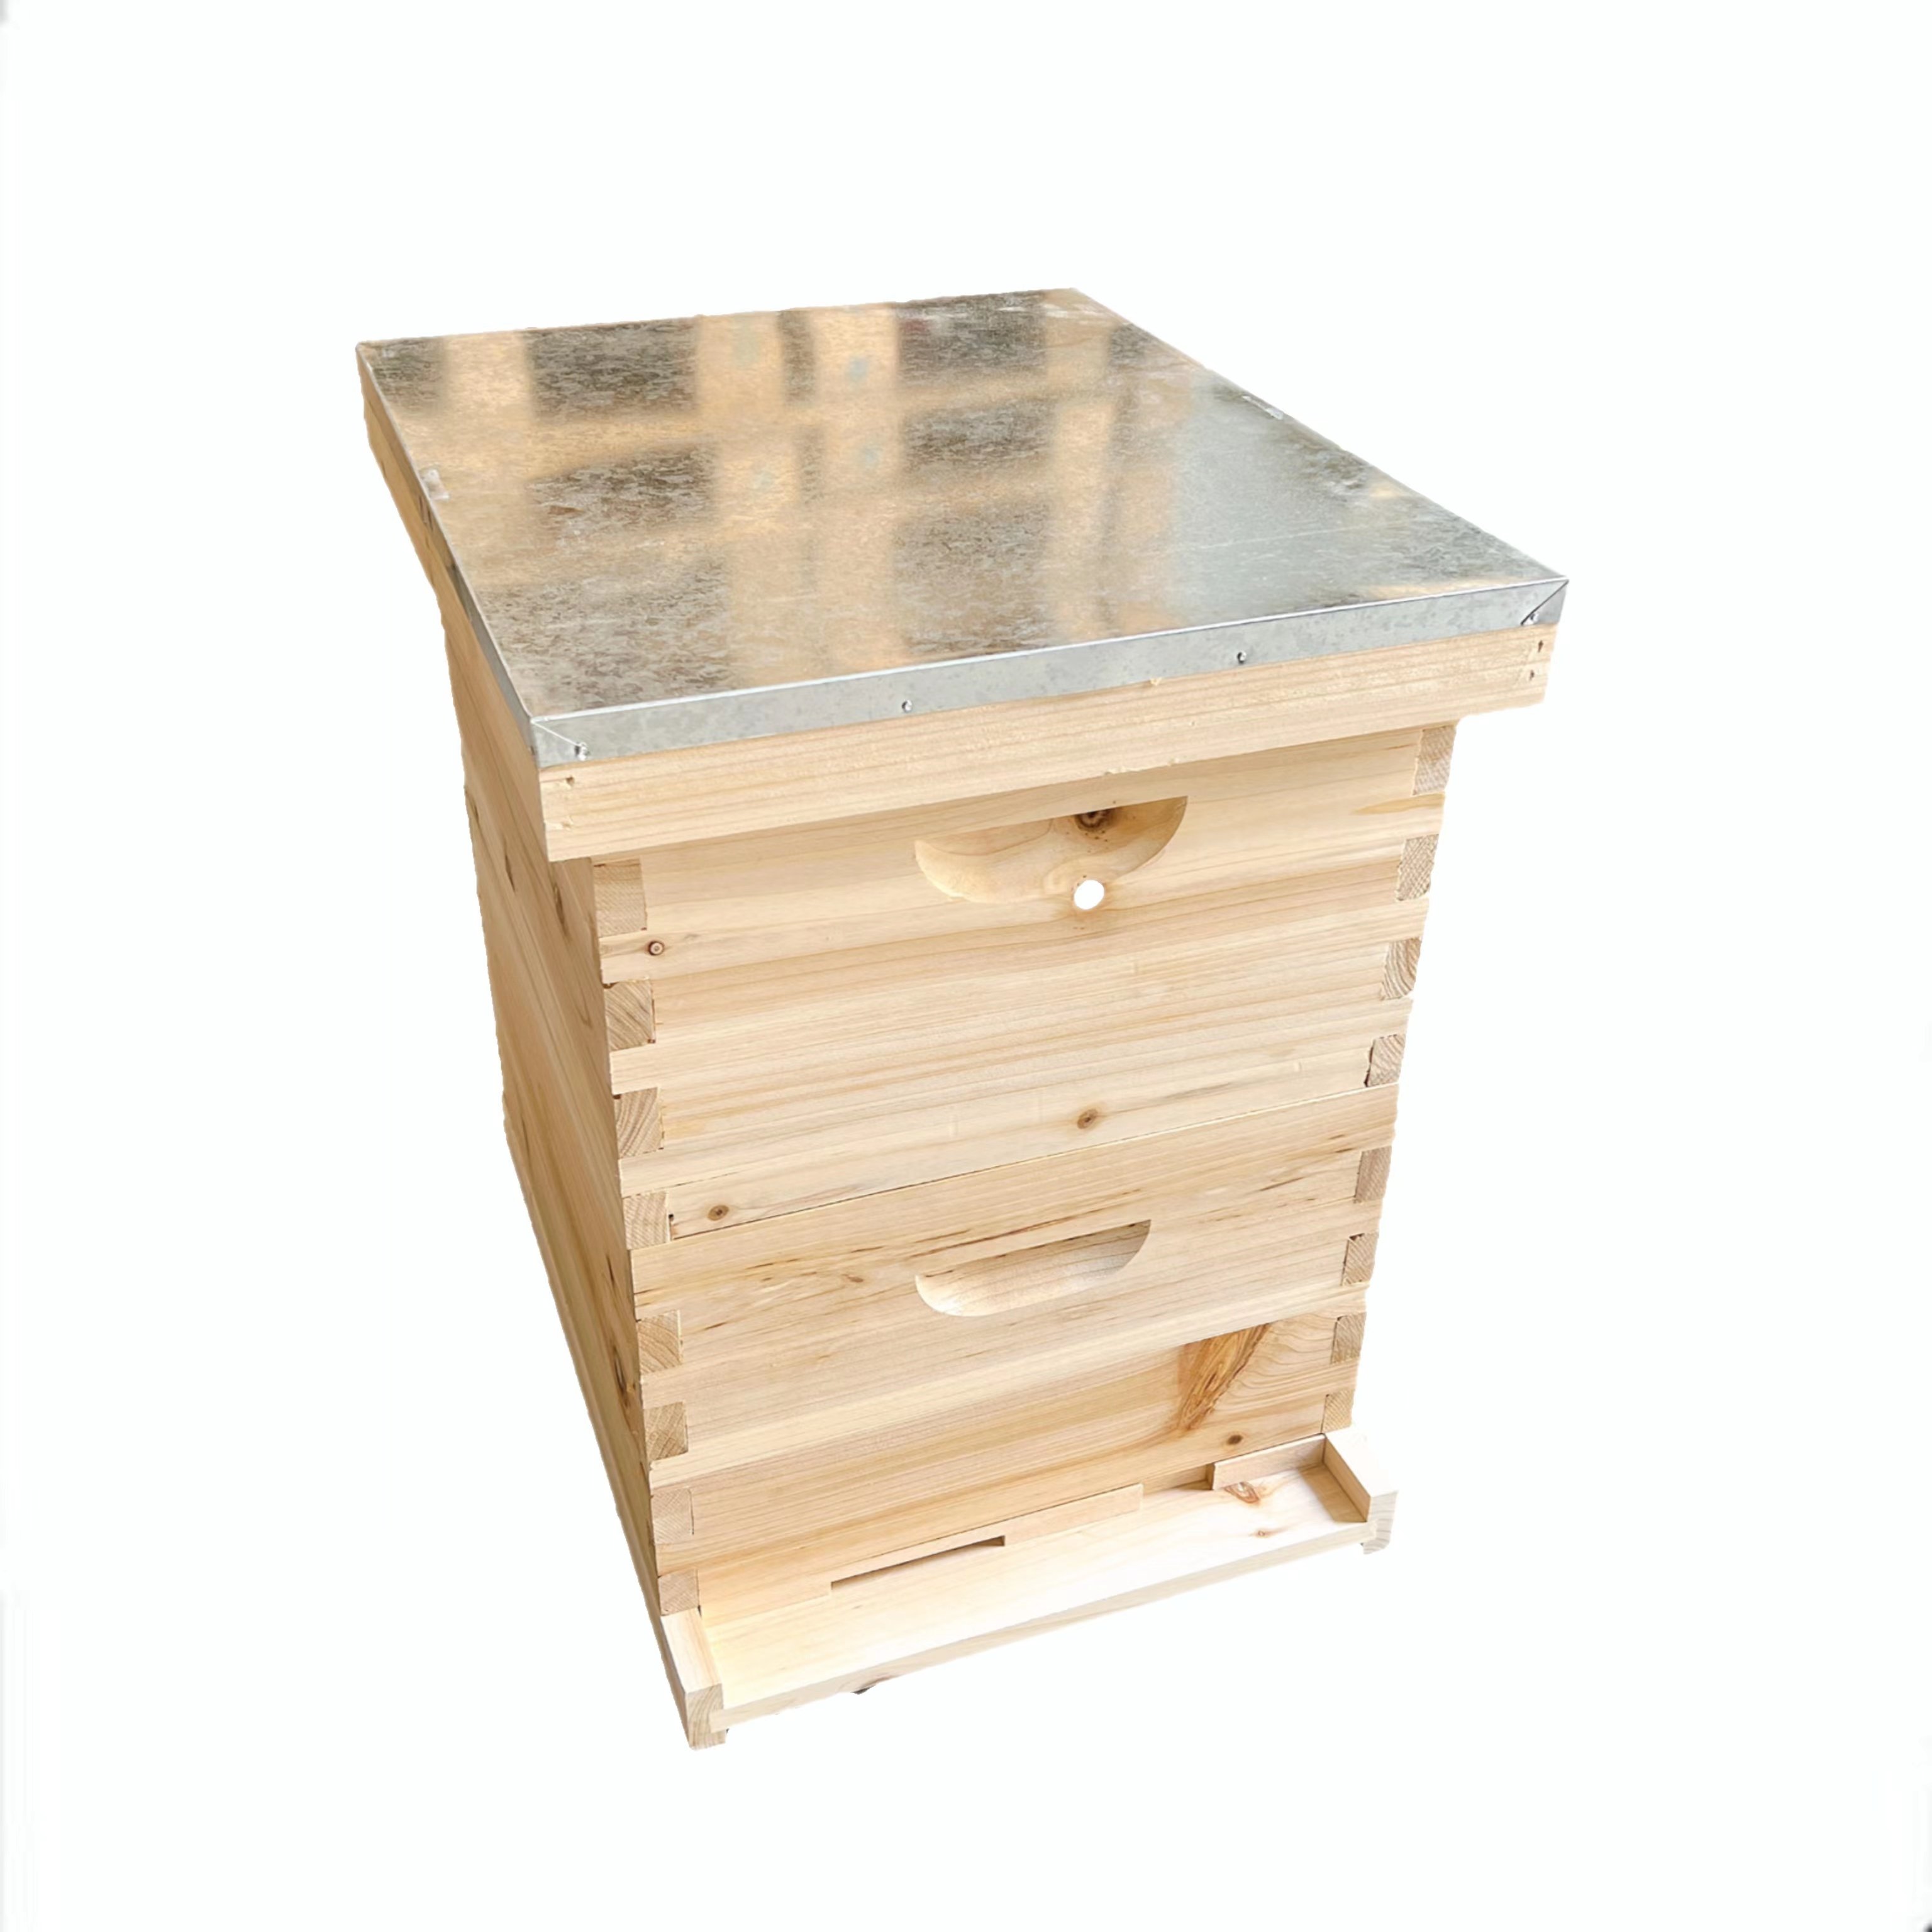 Bees Box Langstroth Wooden Kit Bee Nest Beekeeping Equipment Beekeeper Tool for Bee Hive Supply Nest Frame with Metal Roof